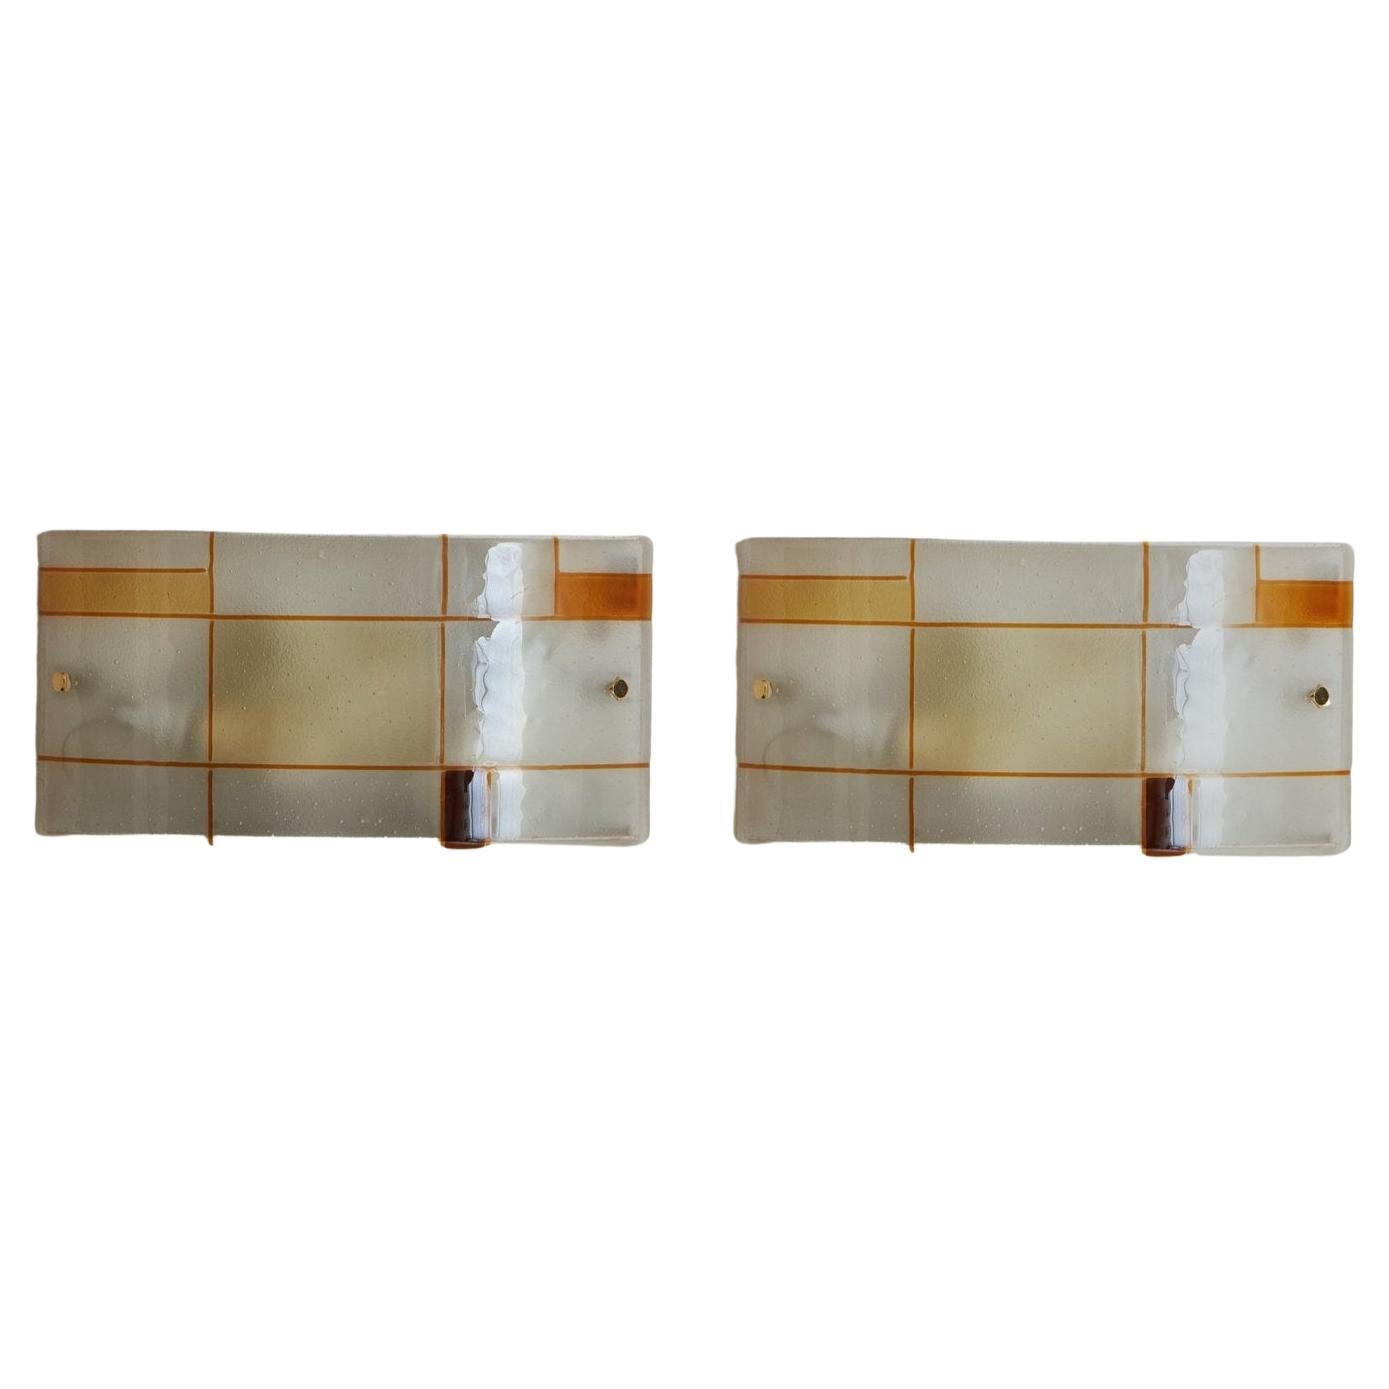 Curved Mondrian Style Murano Glass Sconce, Italy 1960s - 3 Available 